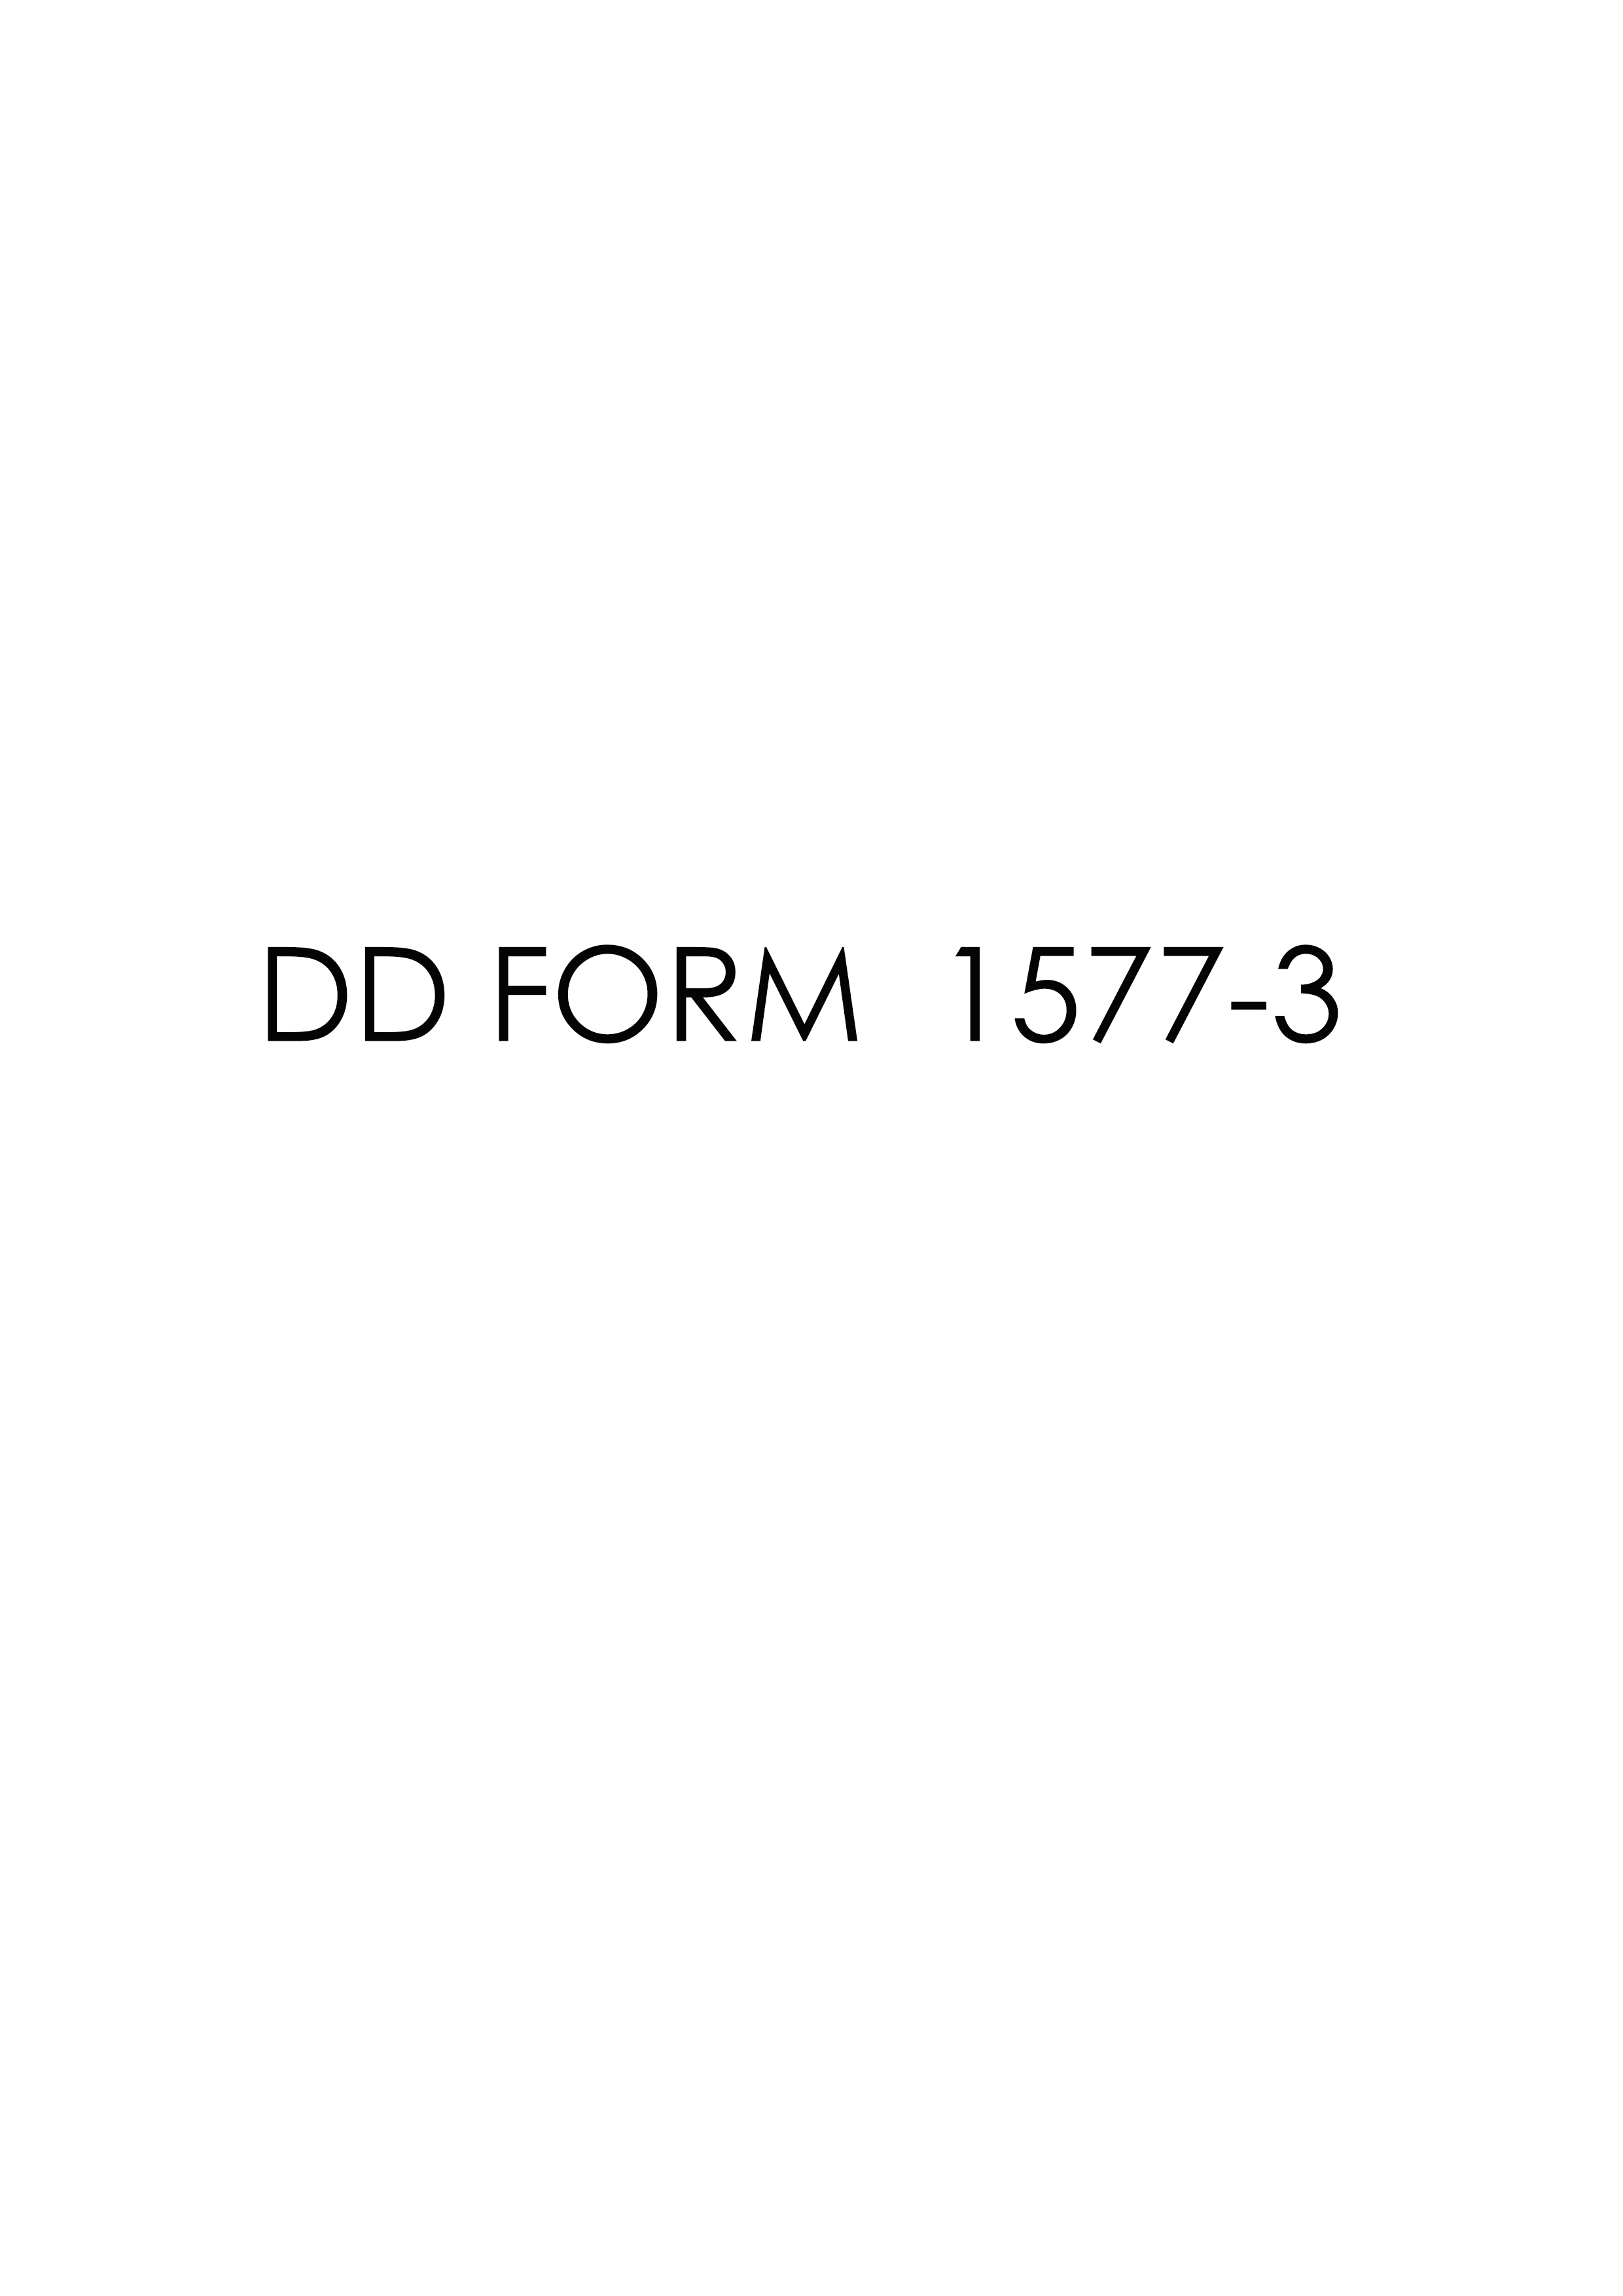 Download Fillable dd Form 1577-3